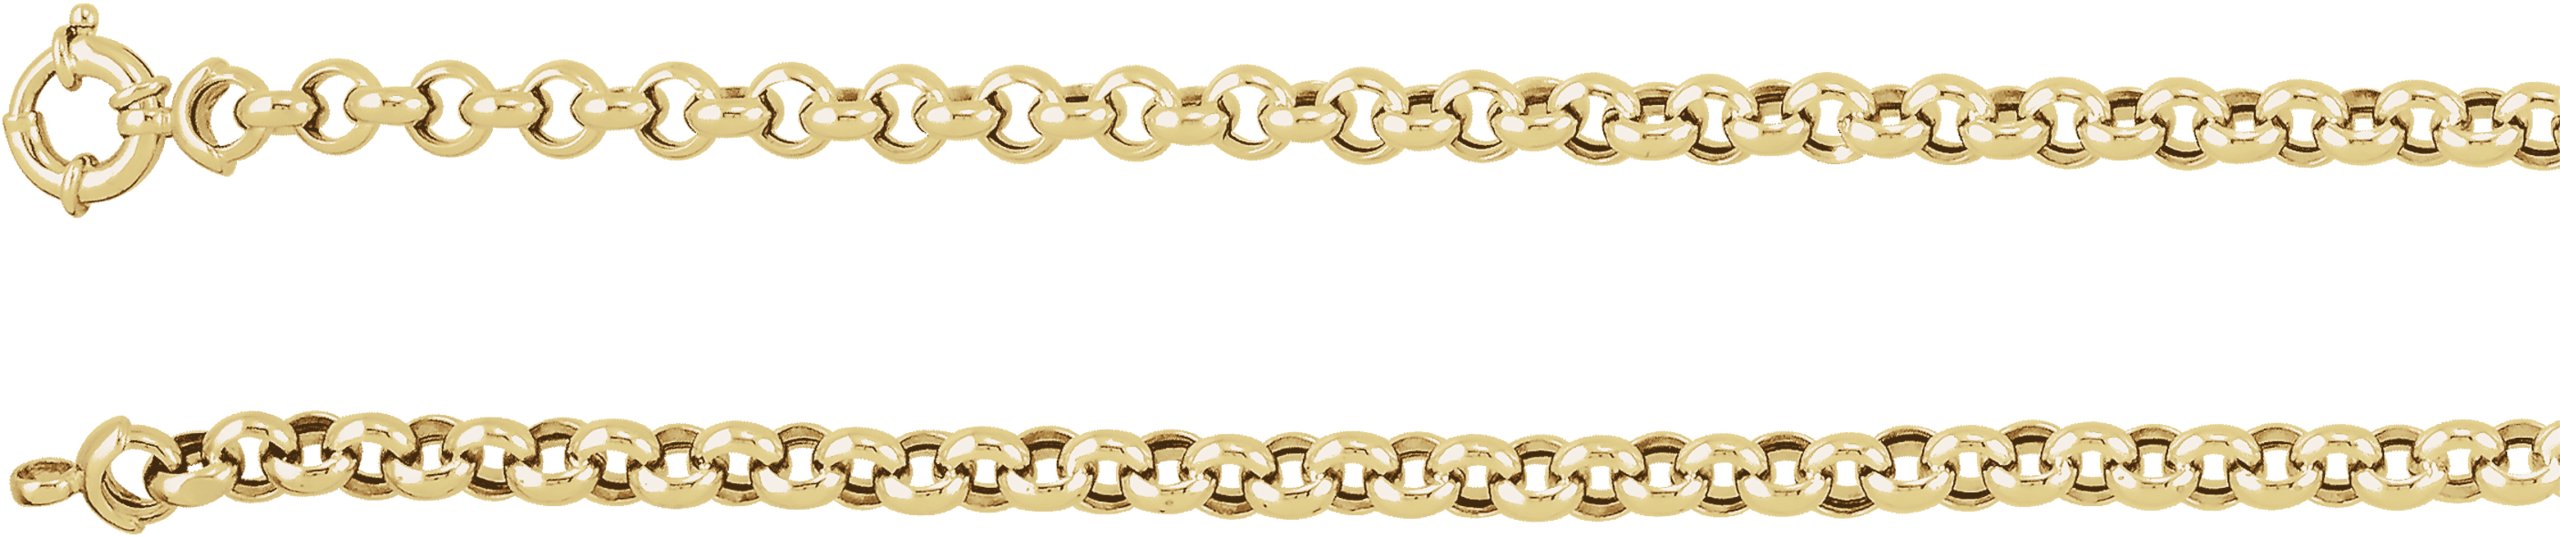 14K Yellow 6.5 mm Hollow Rolo 20" Chain
